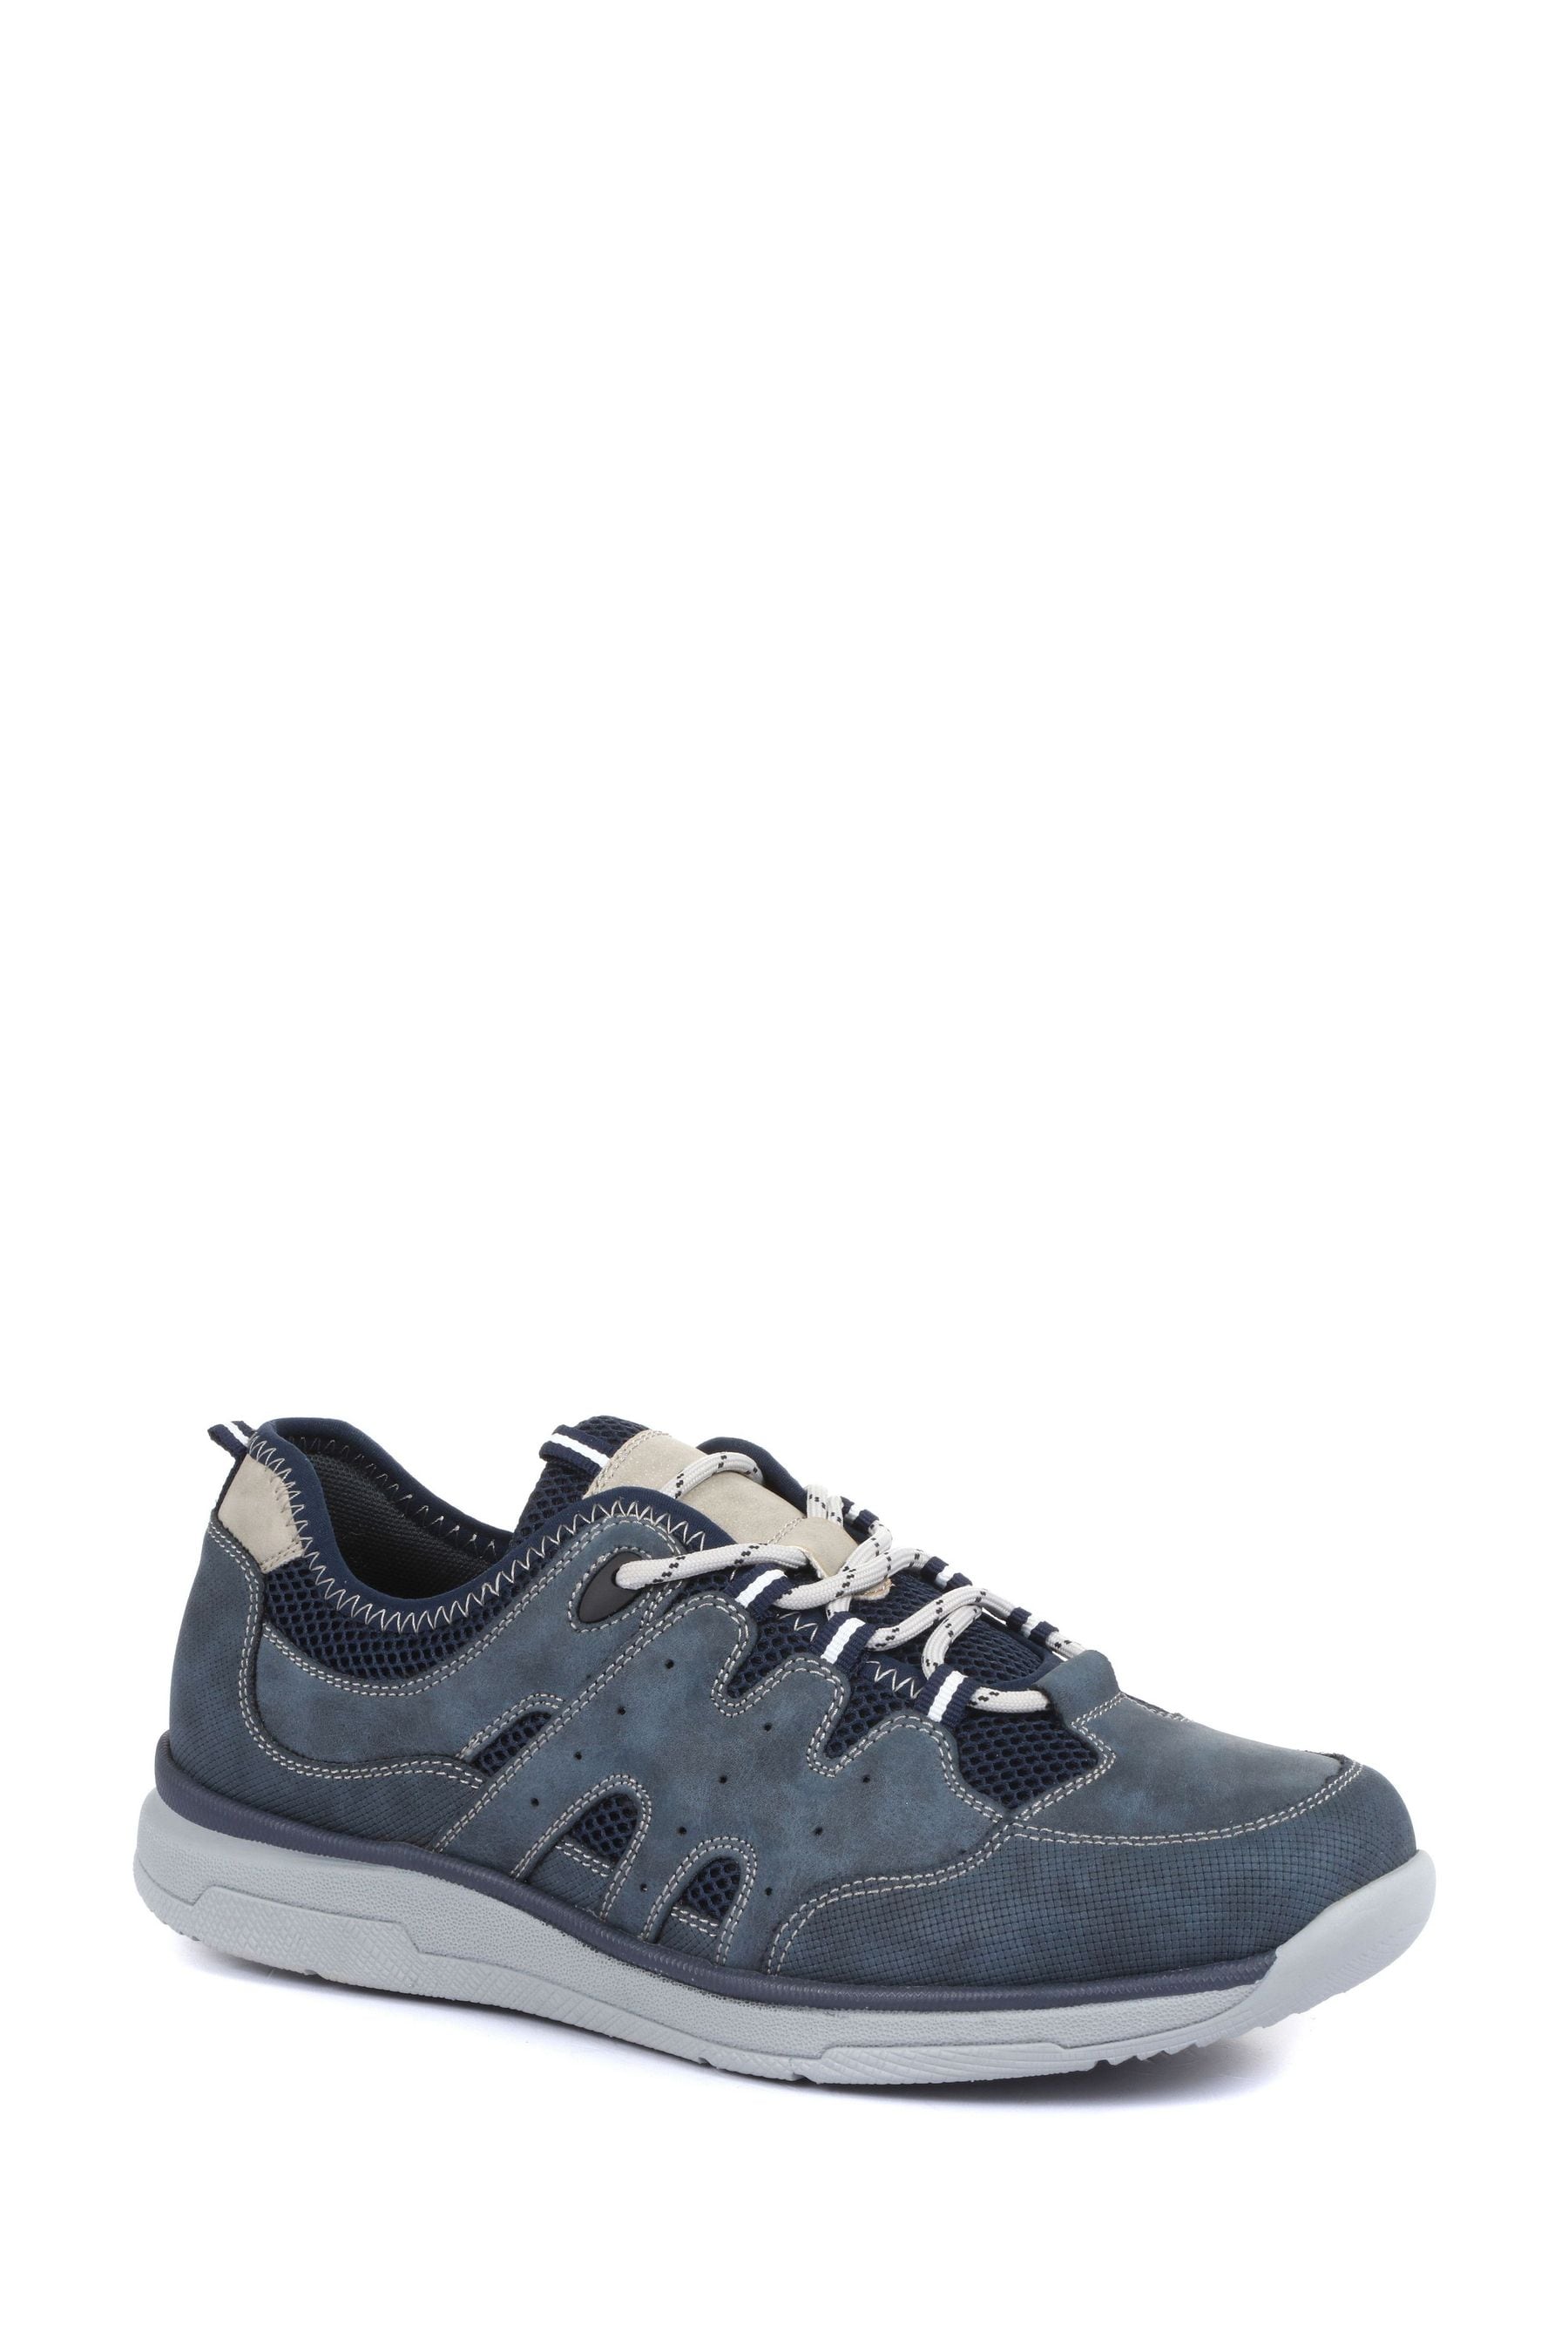 Buy Pavers Mens Wide Fit Lace-Up Trainers from the Next UK online shop